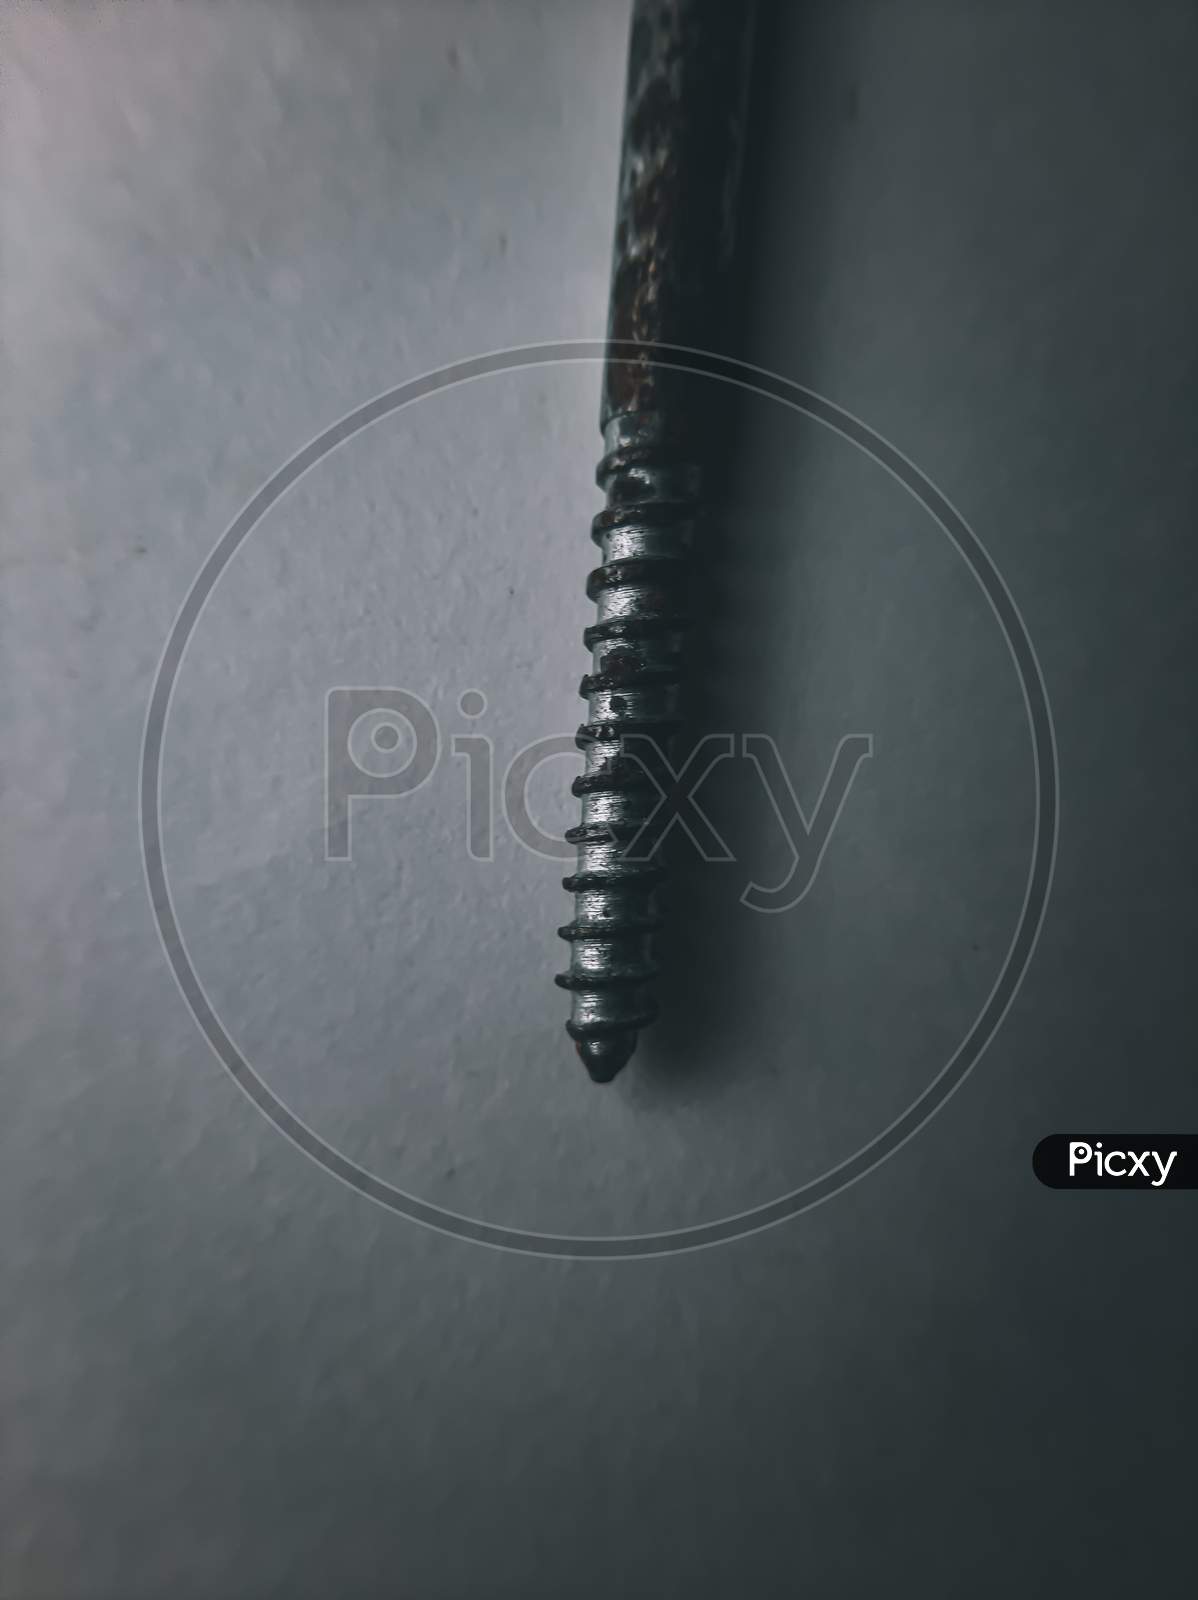 screw.Screw photo with some details and structure. Macro photography with mobile phone